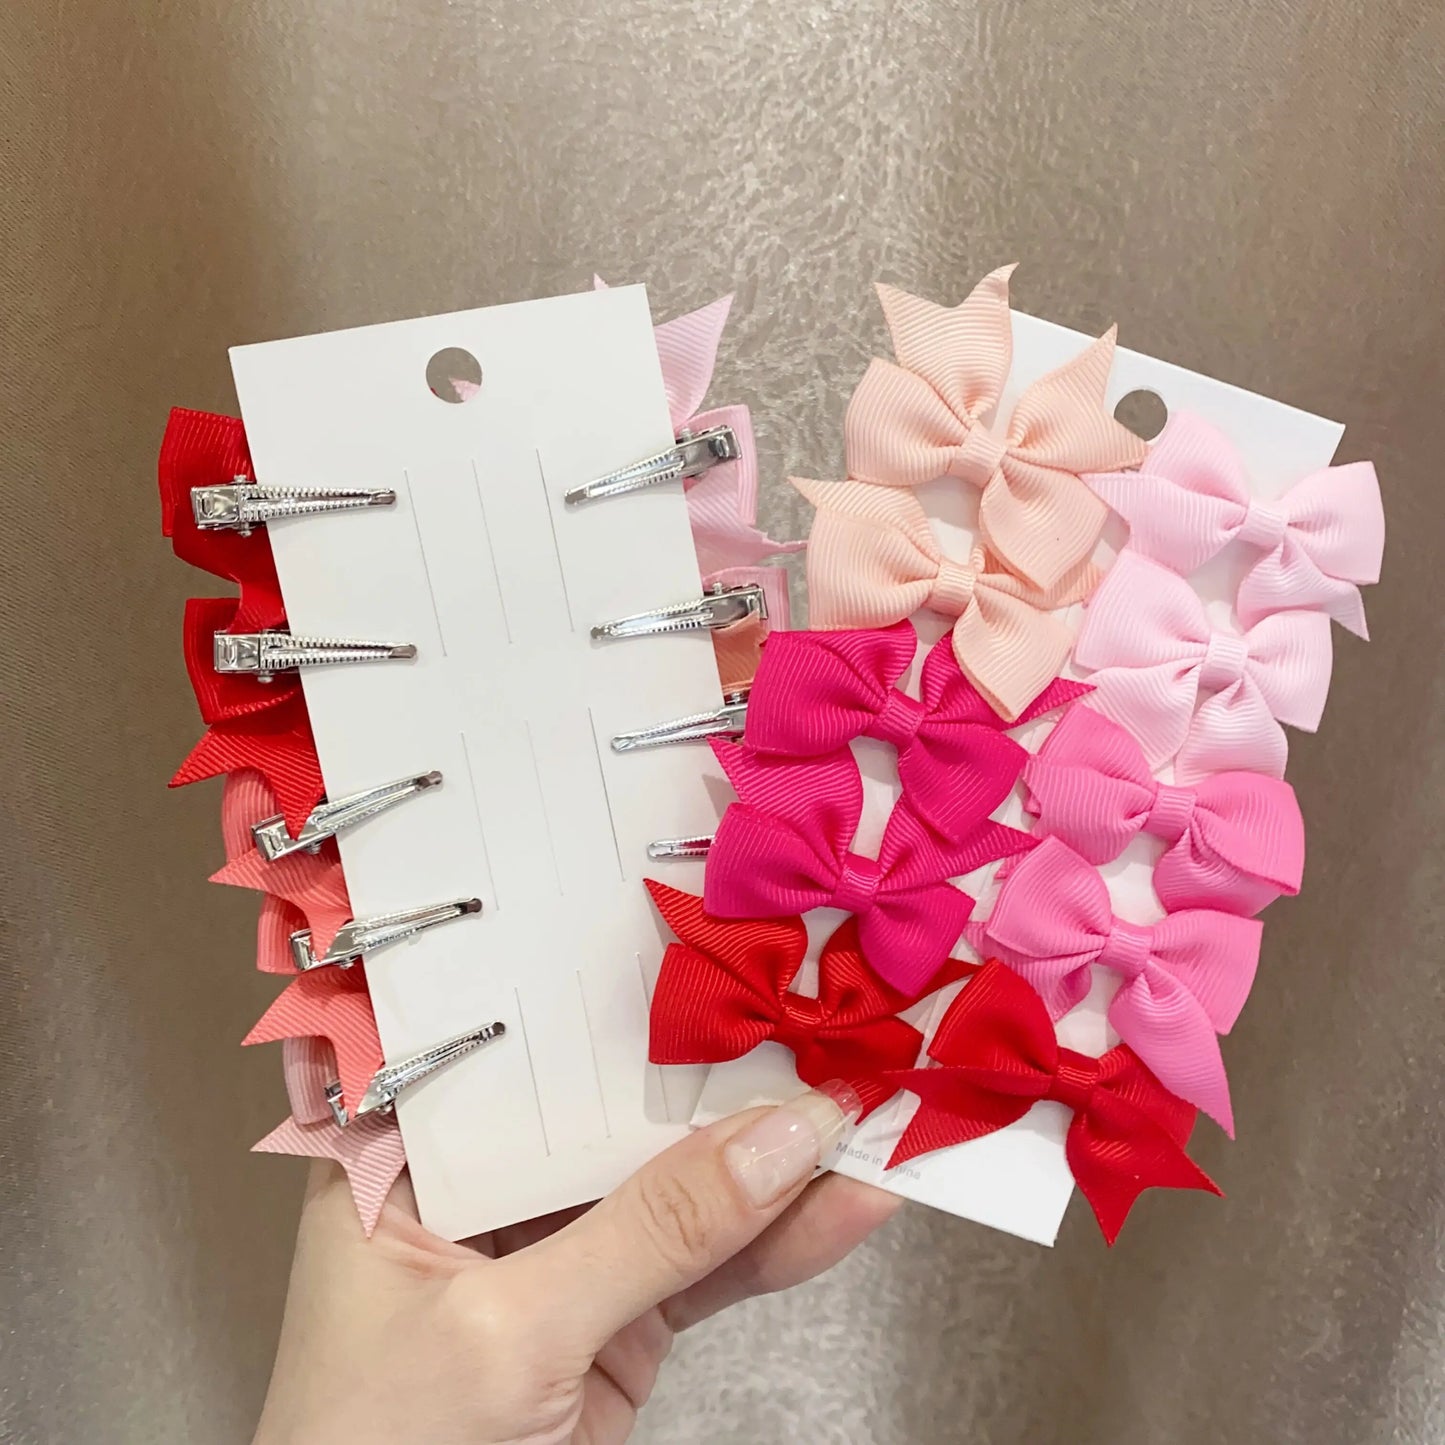 6pcs/10Pcs Kids Solid Color Ribbon Bows Hair Clips for Baby Girls Handmade Bowknot Hairpin Barrettes New Year Hair Accessories